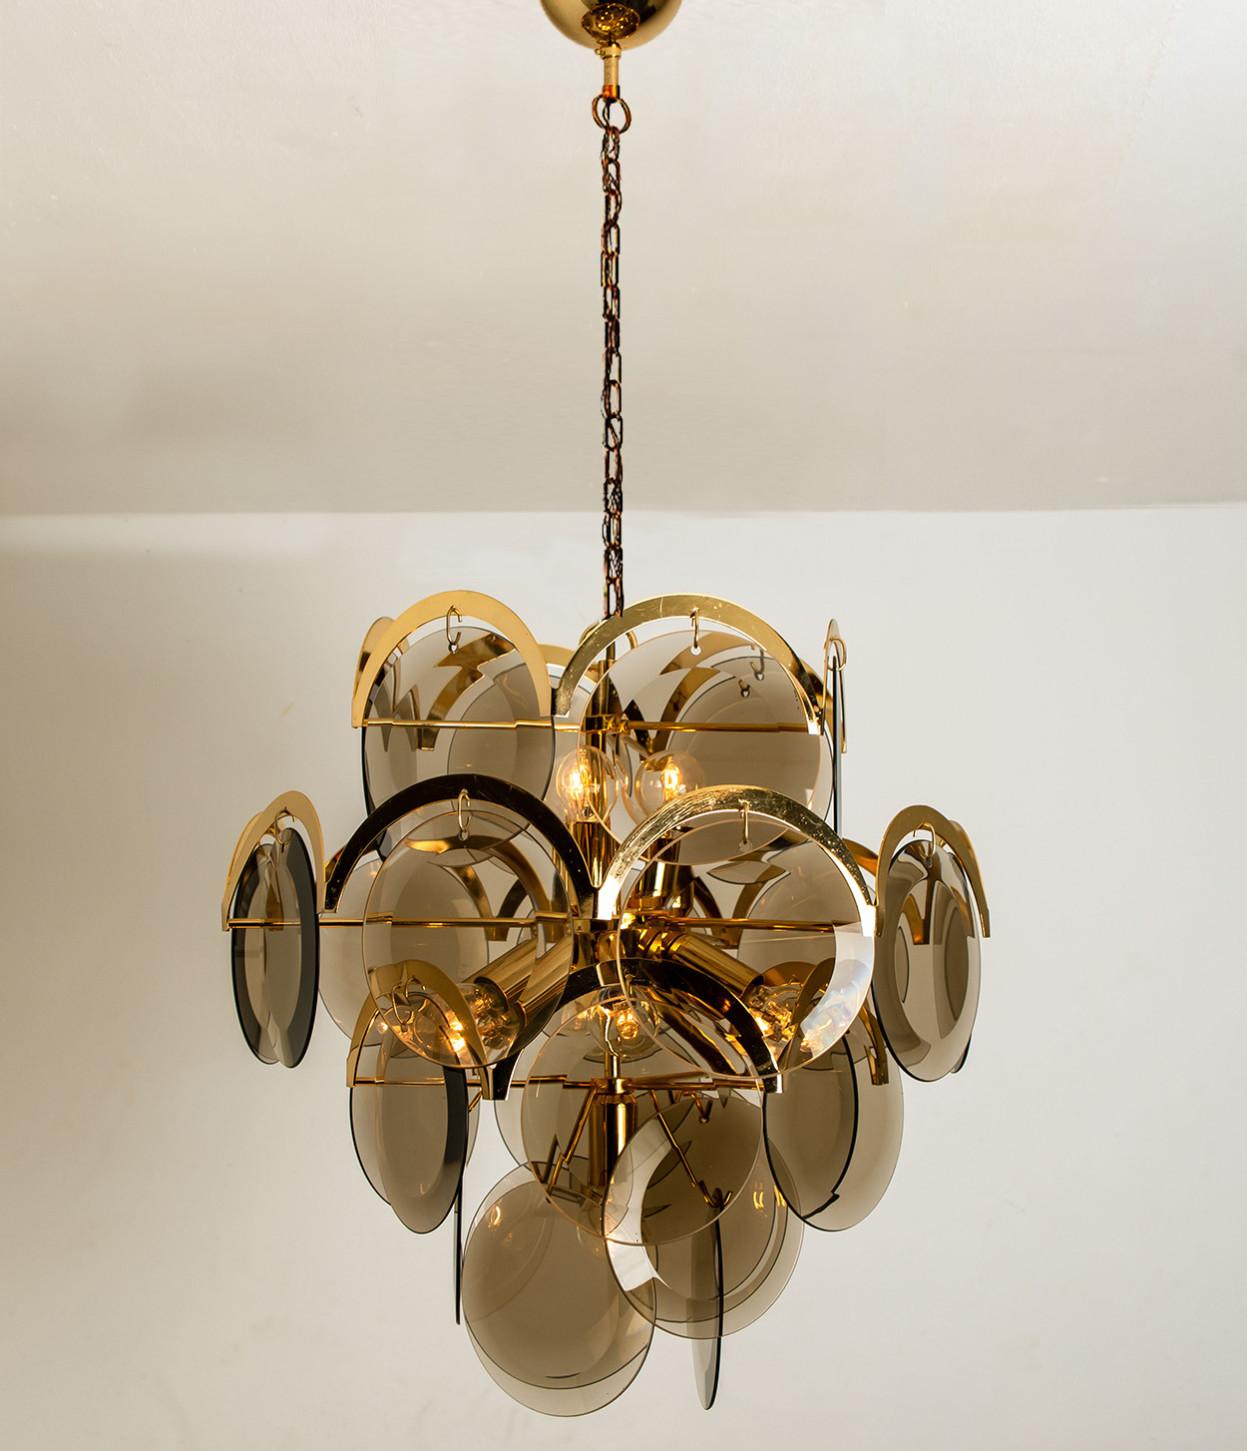 Pair of Smoked Glass and Brass Chandelier in style of Vistosi, Italy, 1970s For Sale 1